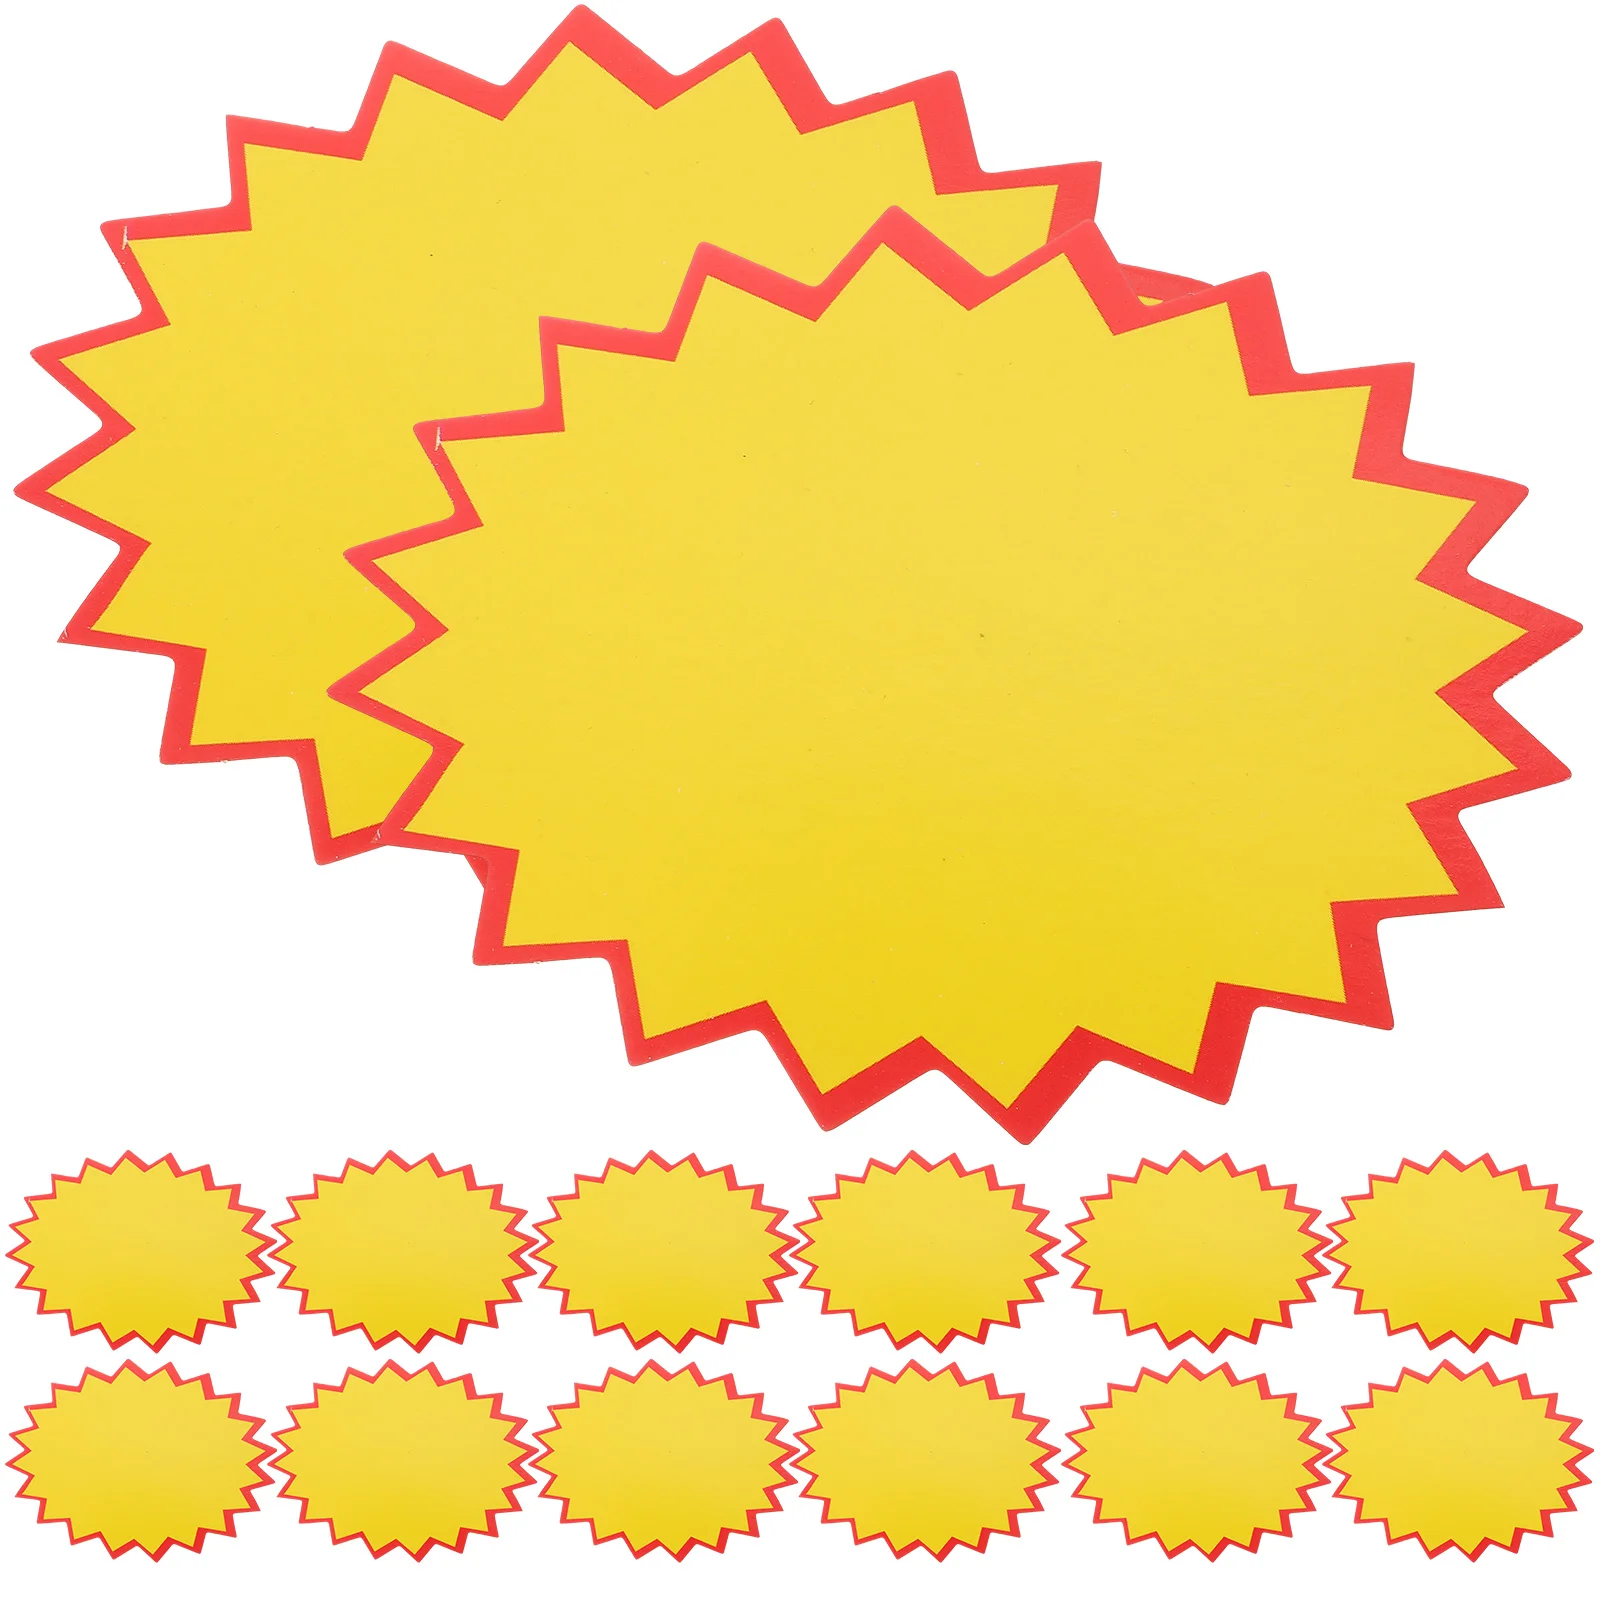 

100 Sheets Label Star Sticker Paper Price Tag Goods Commodity Signs Advertisement Tags Jam Advertising Stickers